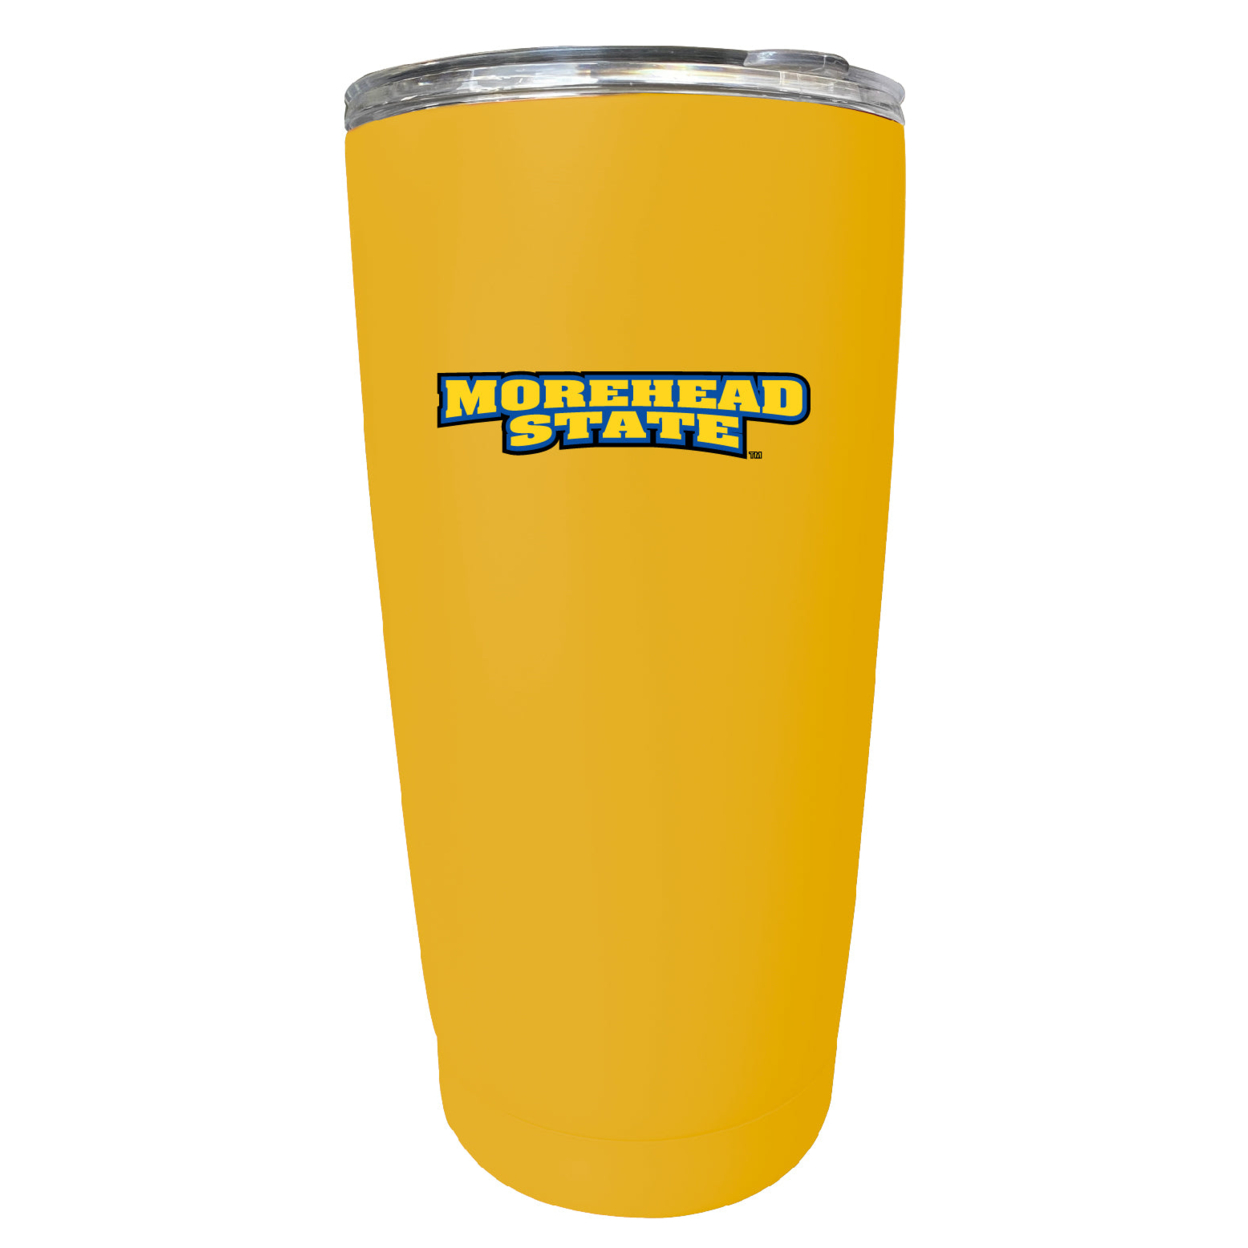 Morehead State University 16 Oz Stainless Steel Insulated Tumbler - Yellow